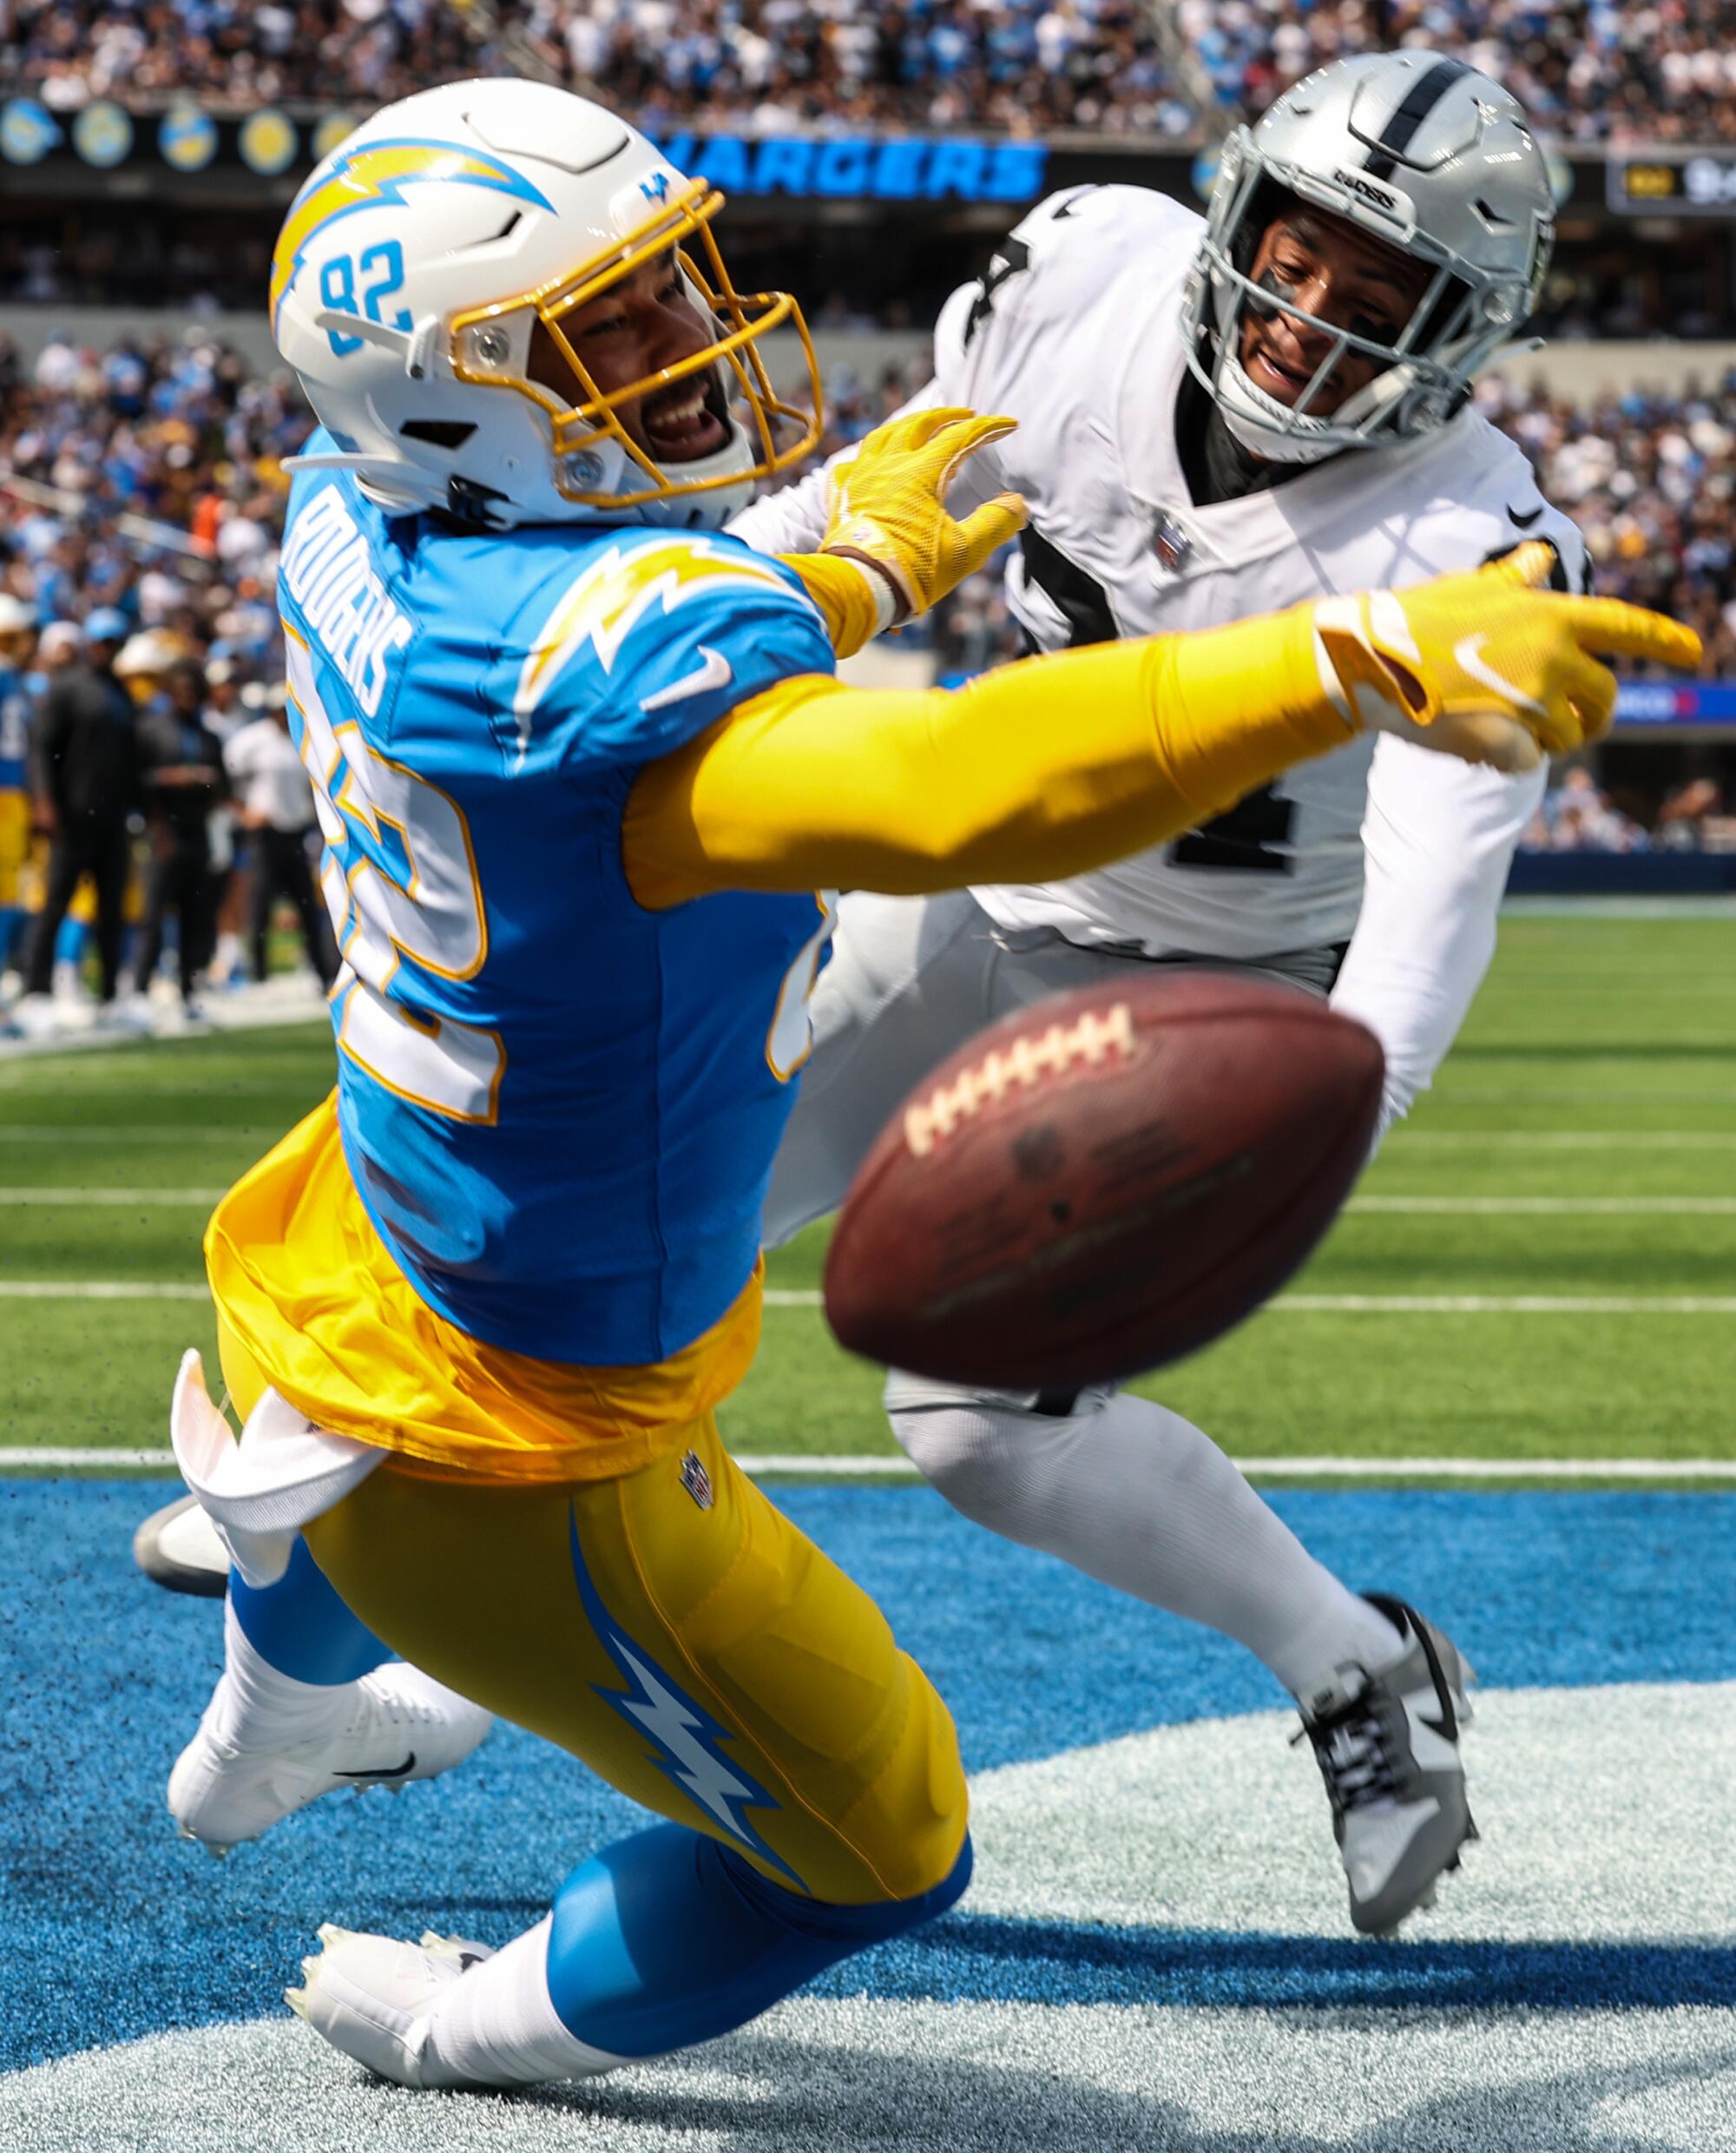 Chargers tight end Richard Rodgers misses a potential touchdown pass while defended by Raiders safety Johnathan Abram.